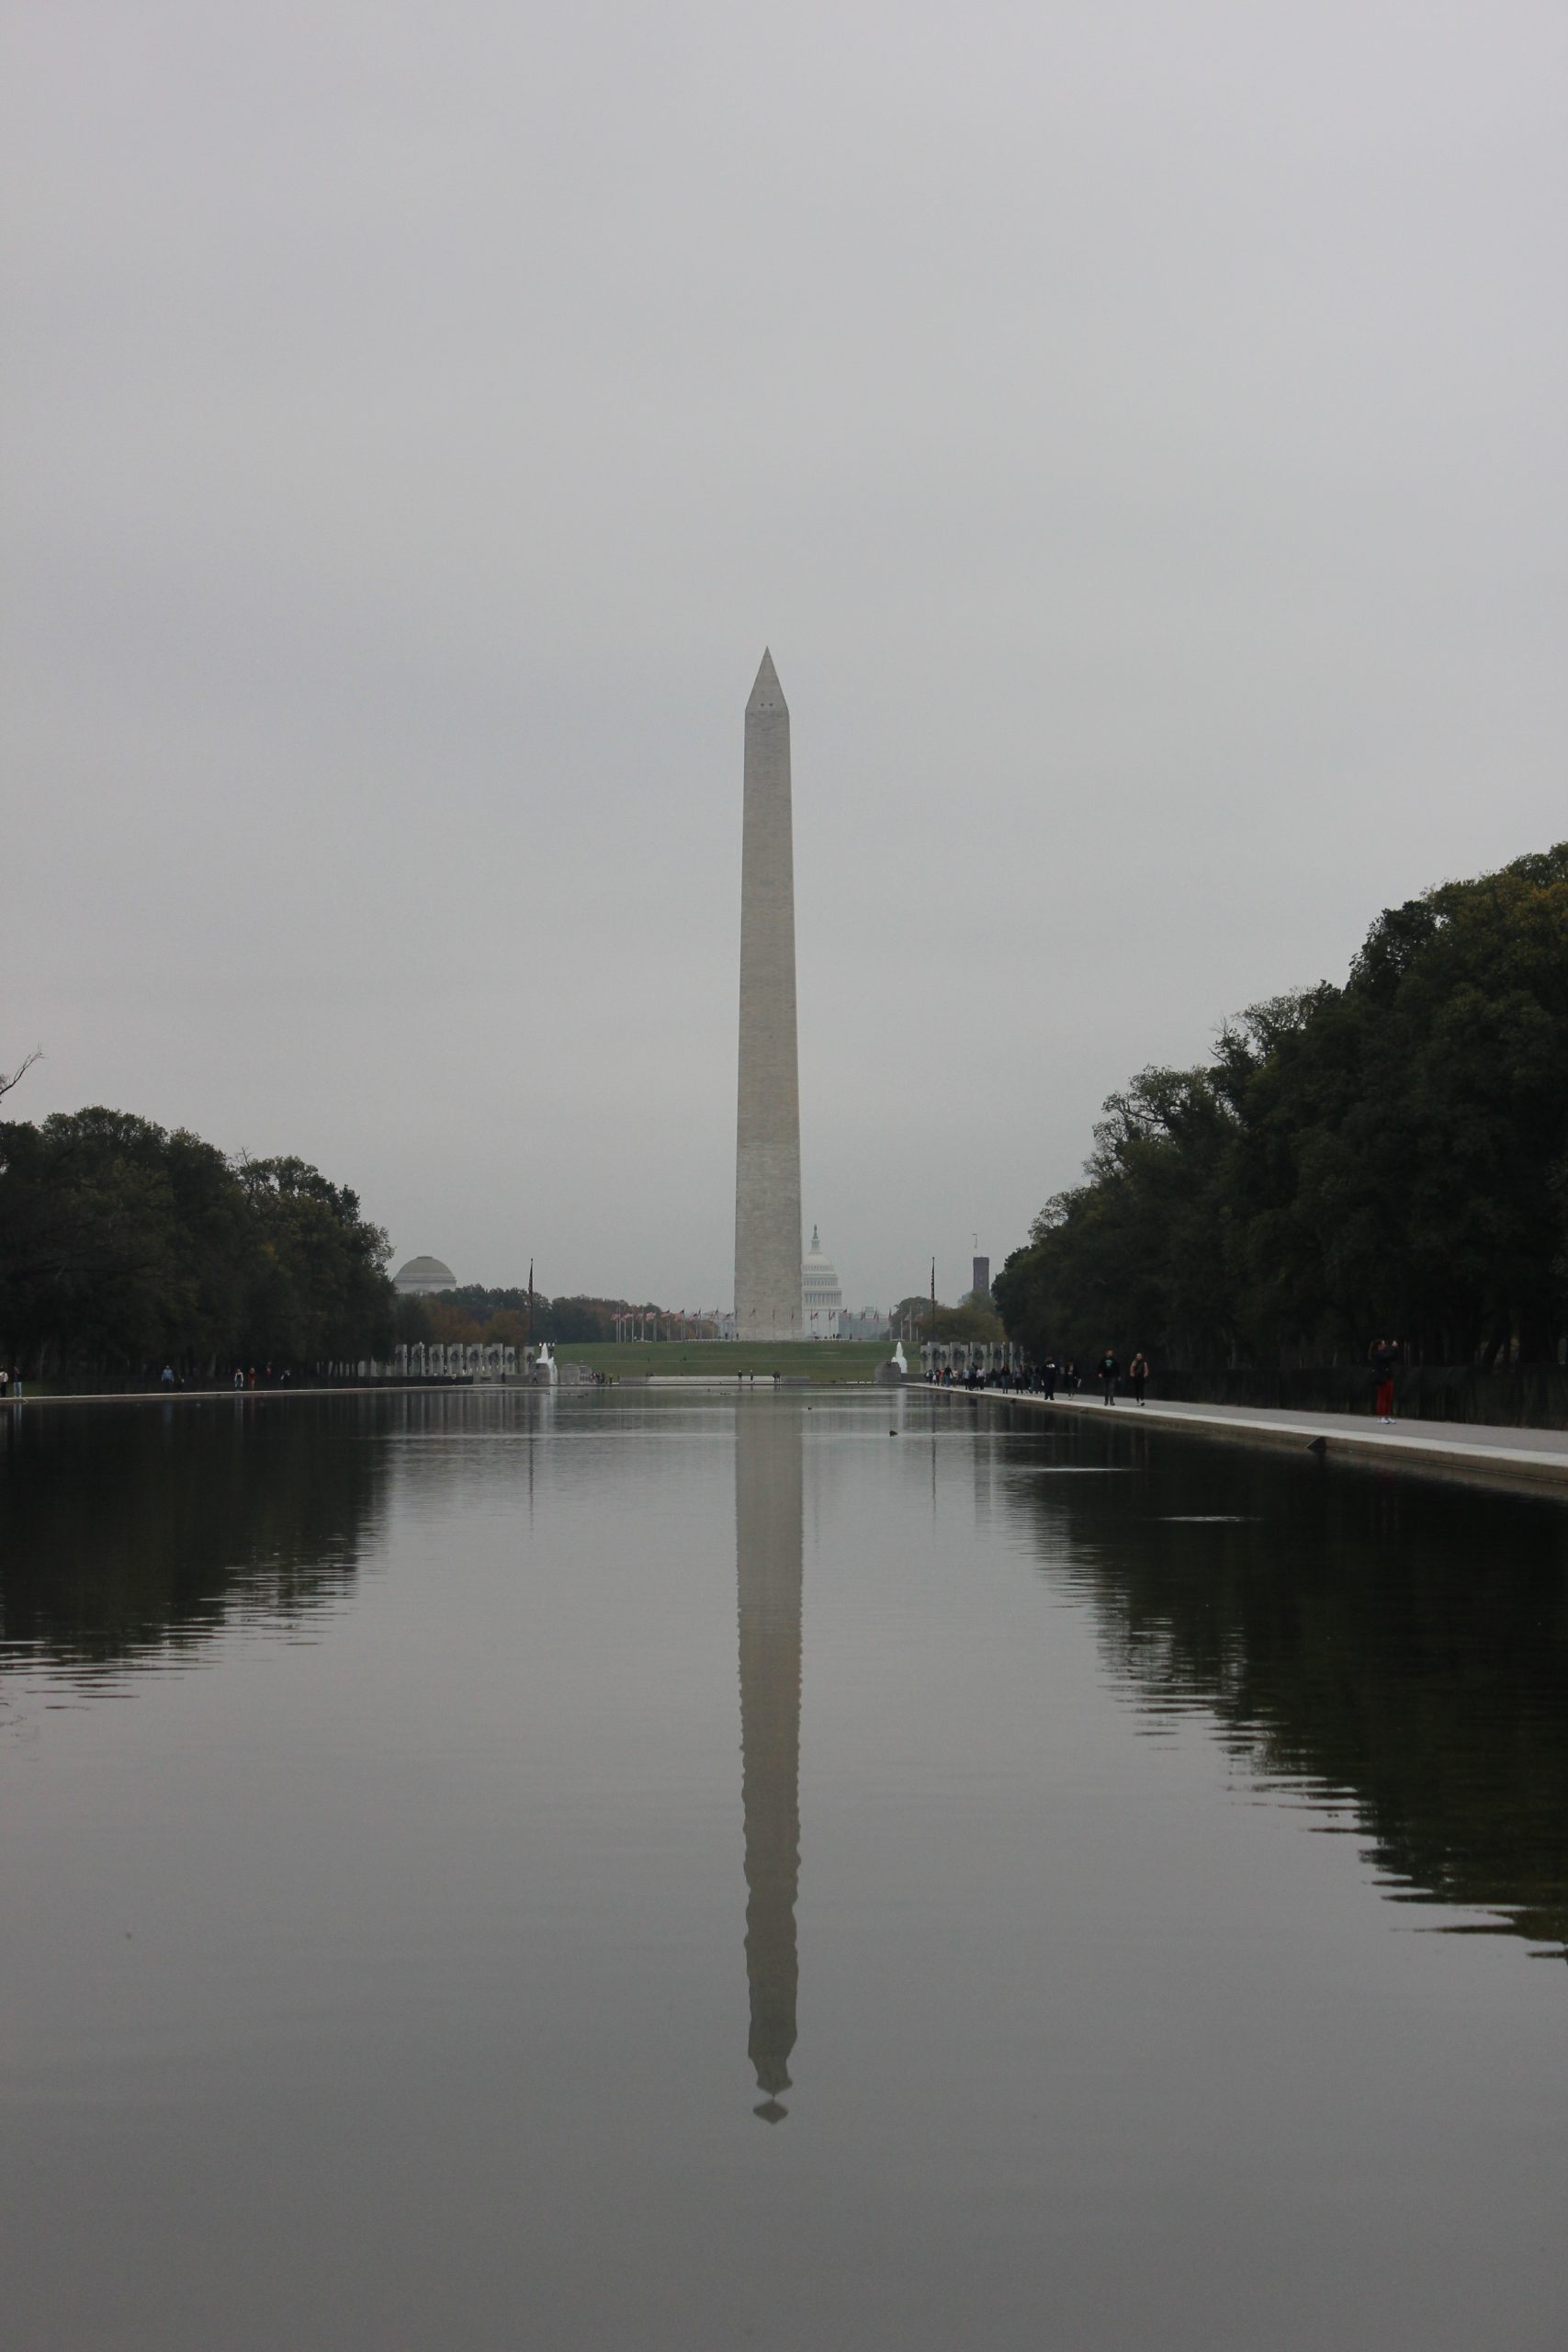 The Washington Monument from a distance.Photo by The Signal Reporter Karsyn Coxie.